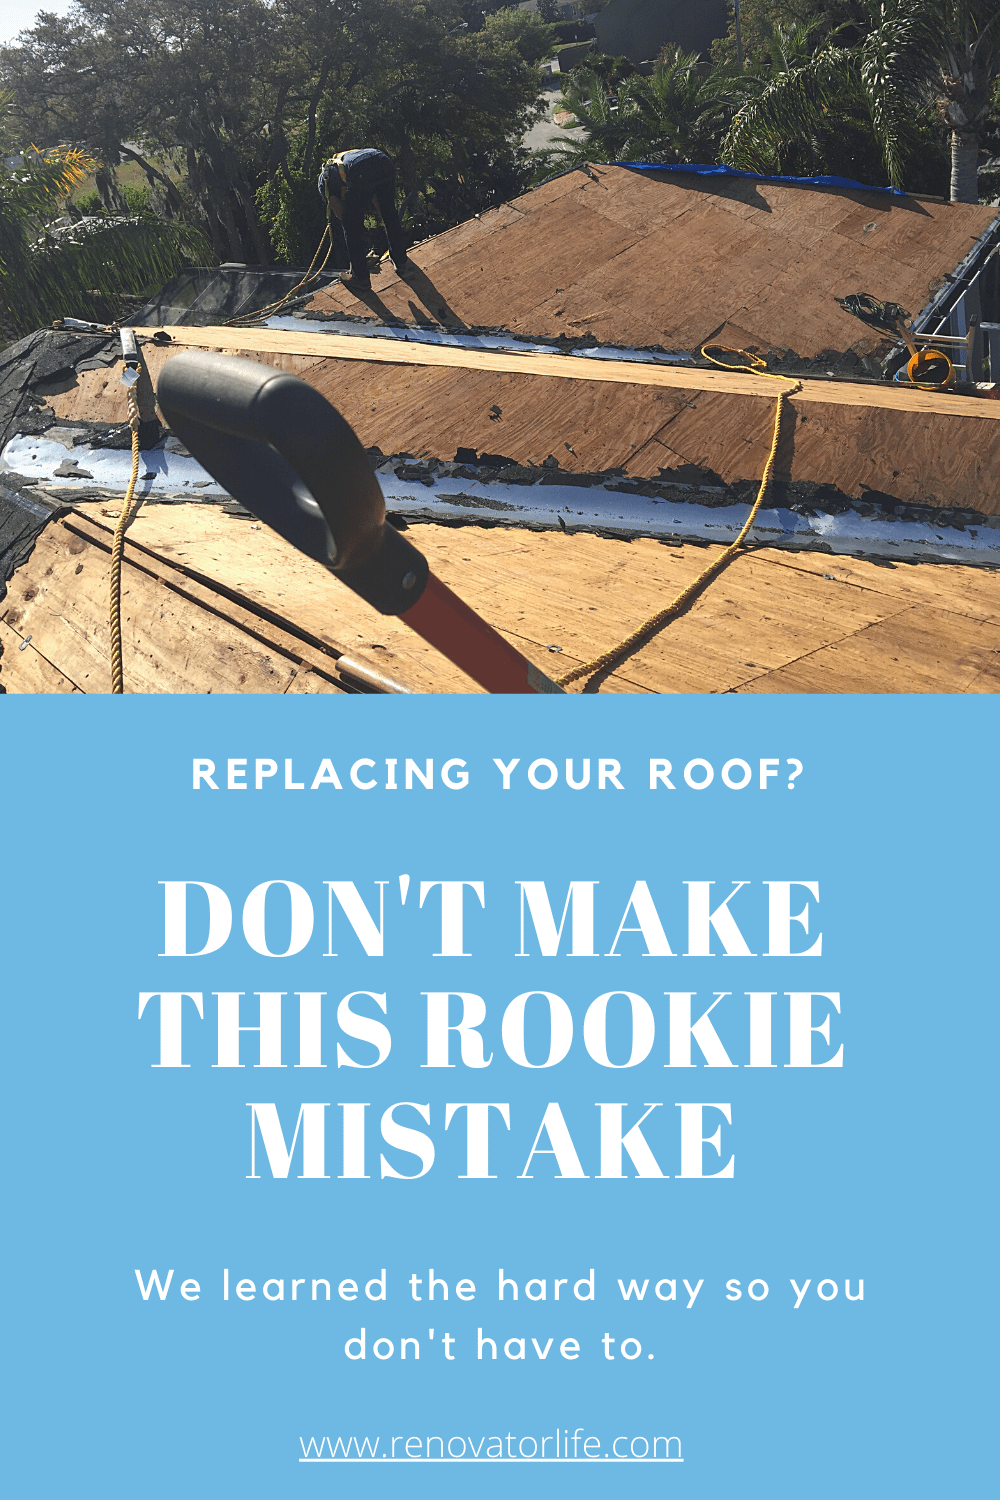 Don't Make this rookie mistake when replacing your roof